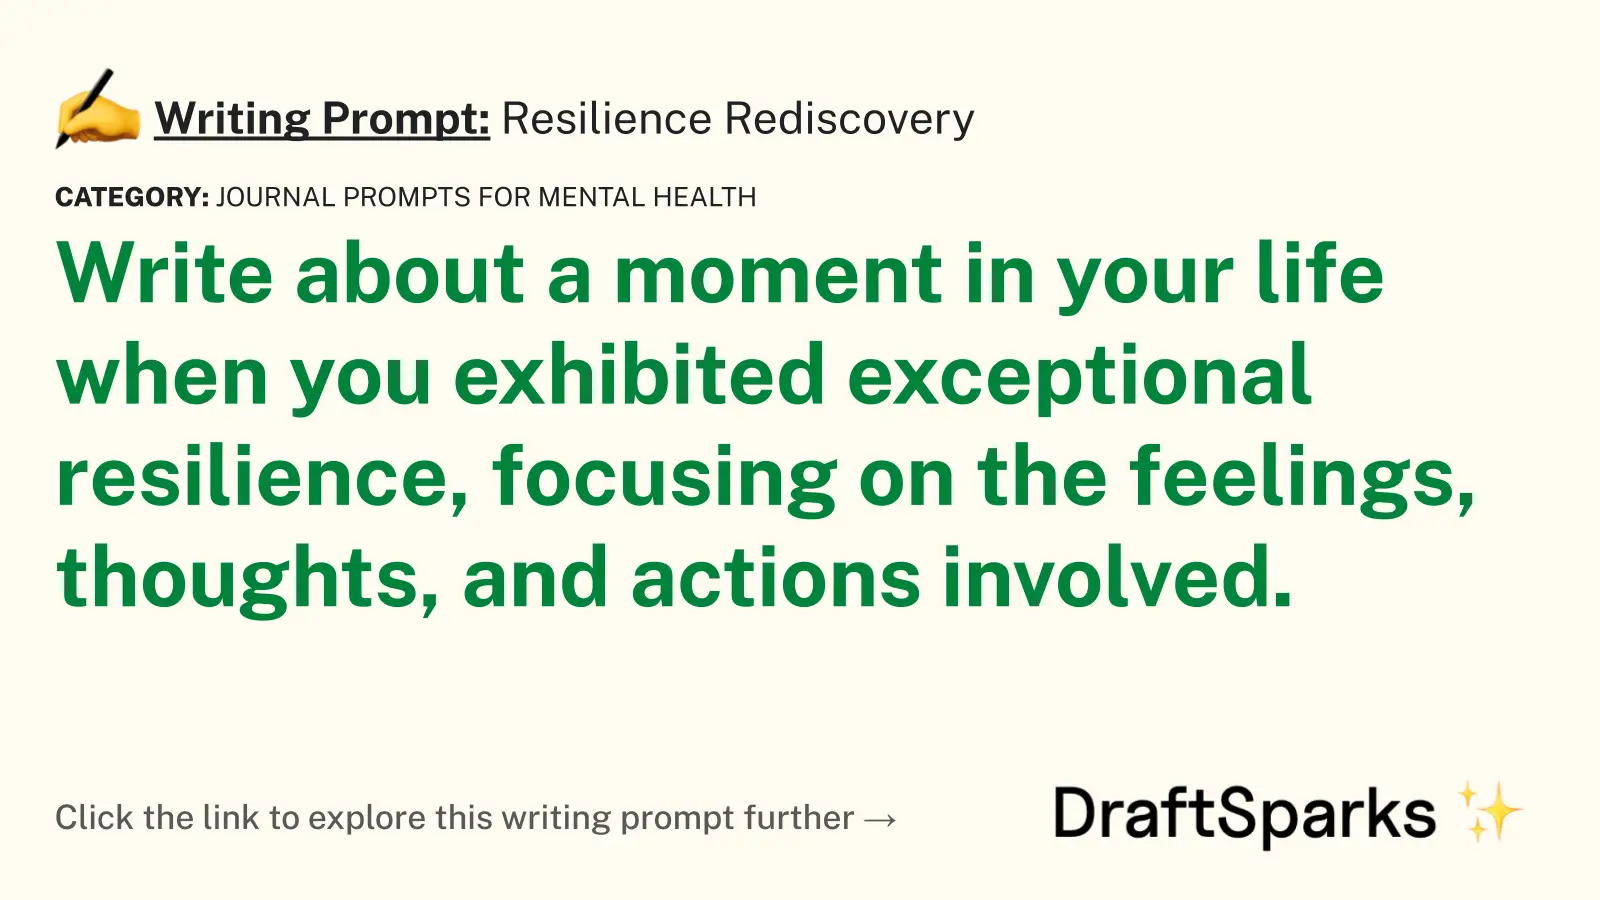 Resilience Rediscovery